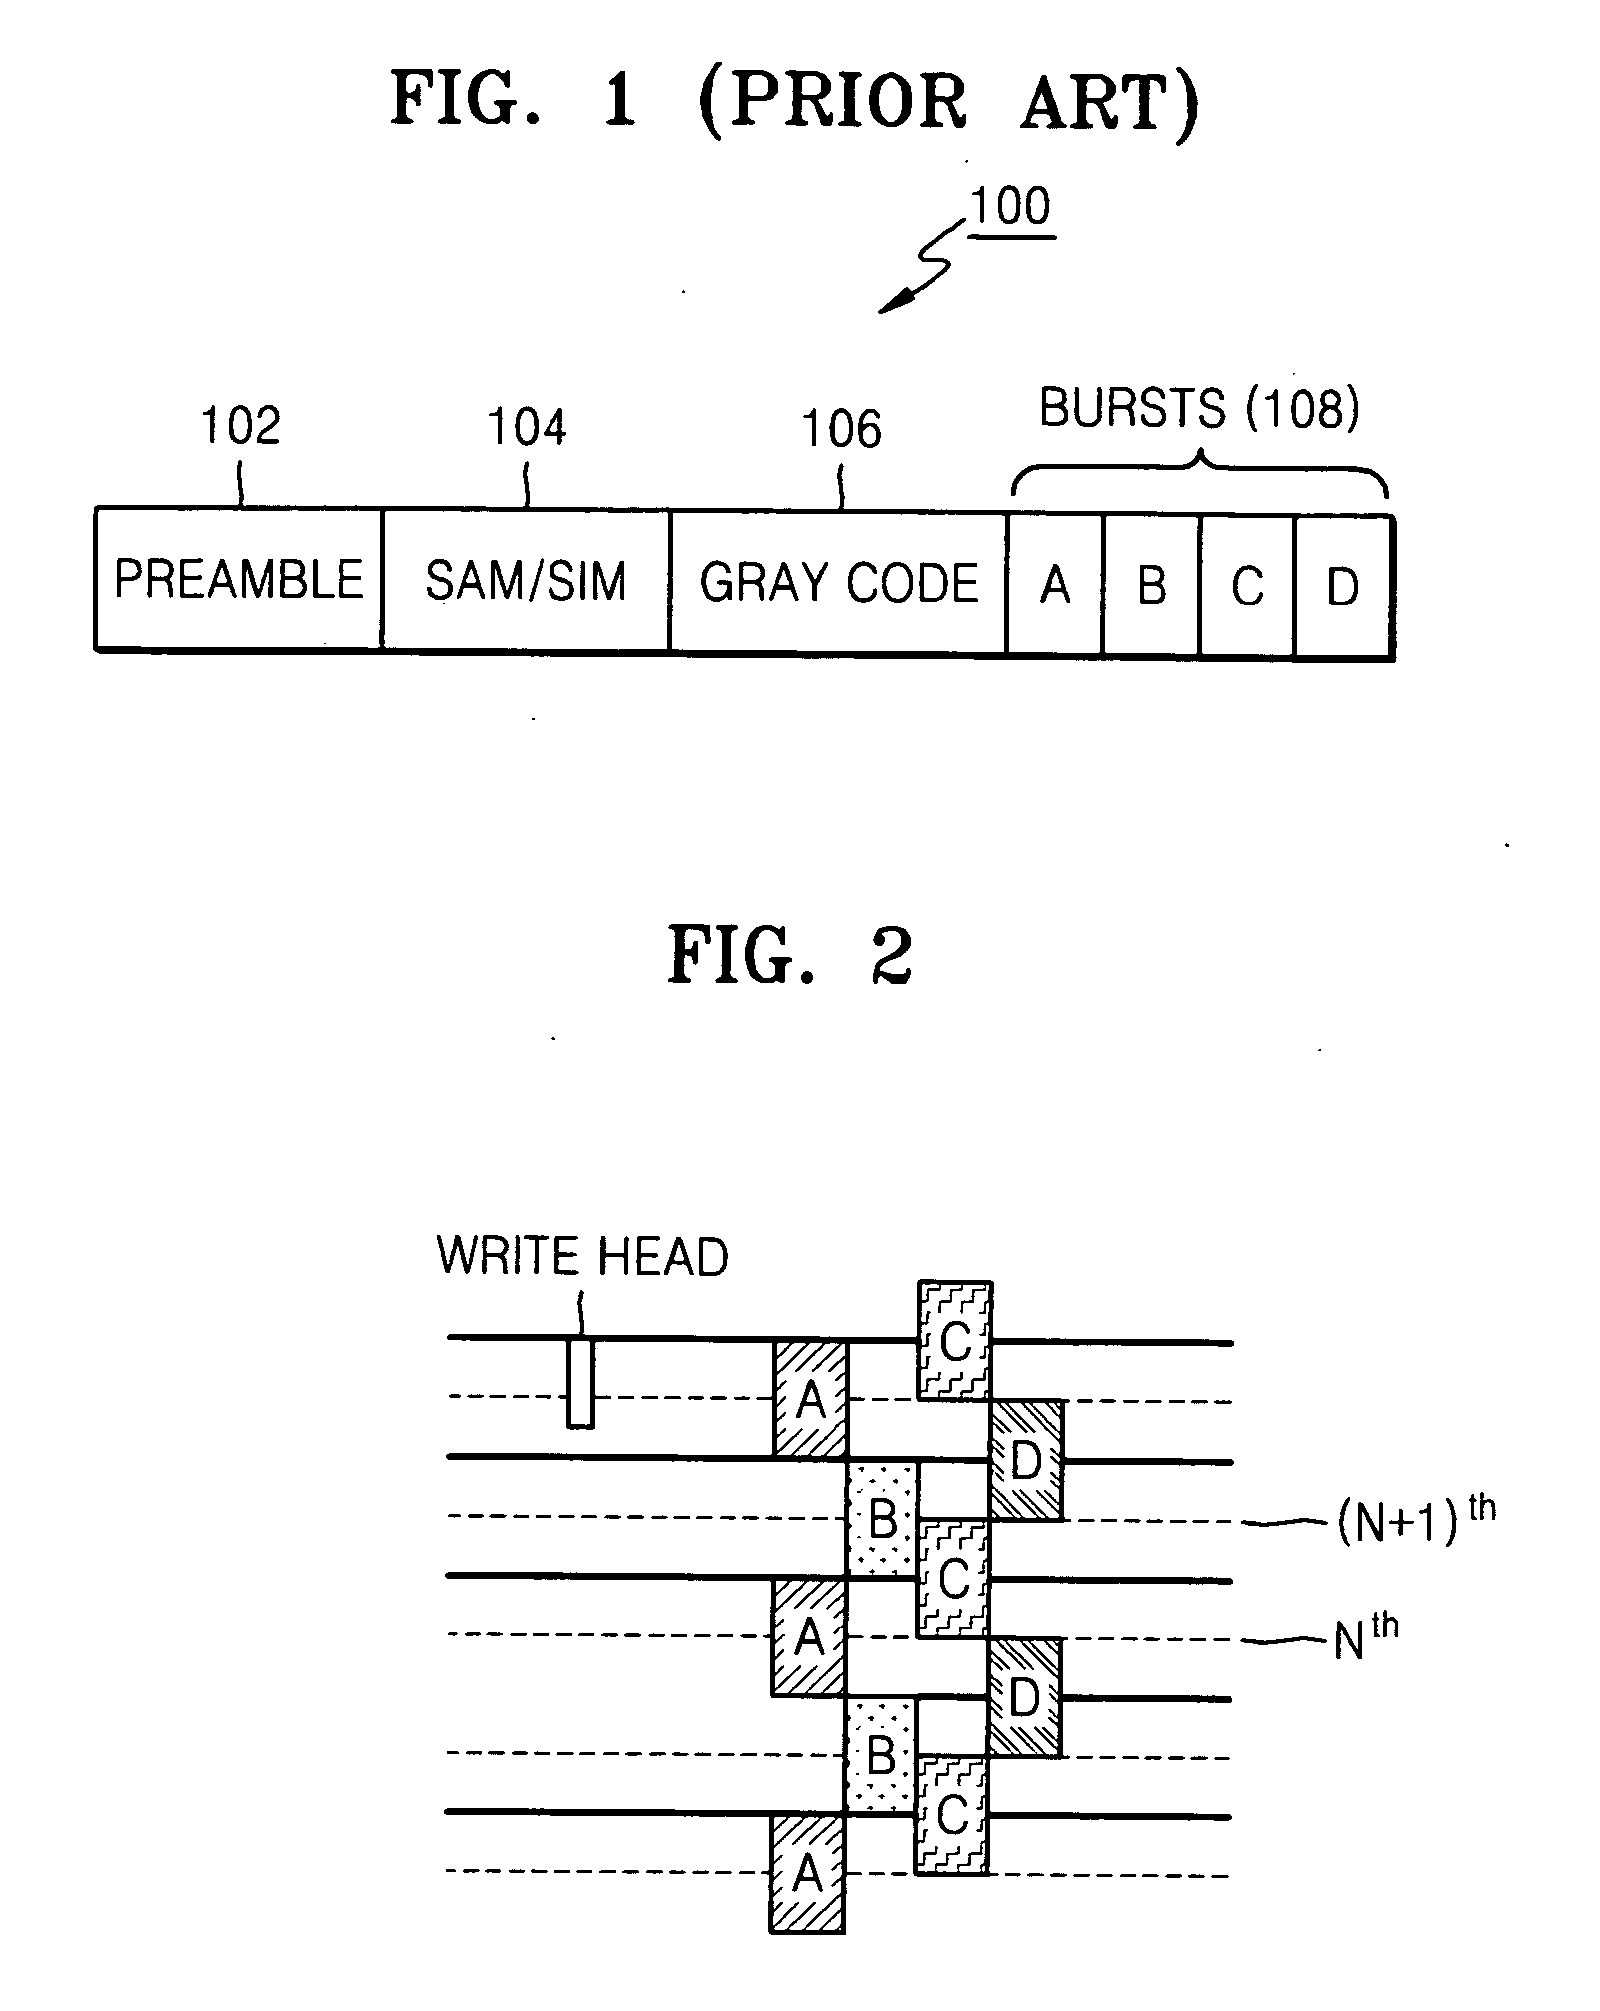 Method for recording bursts on a disk and related apparatus